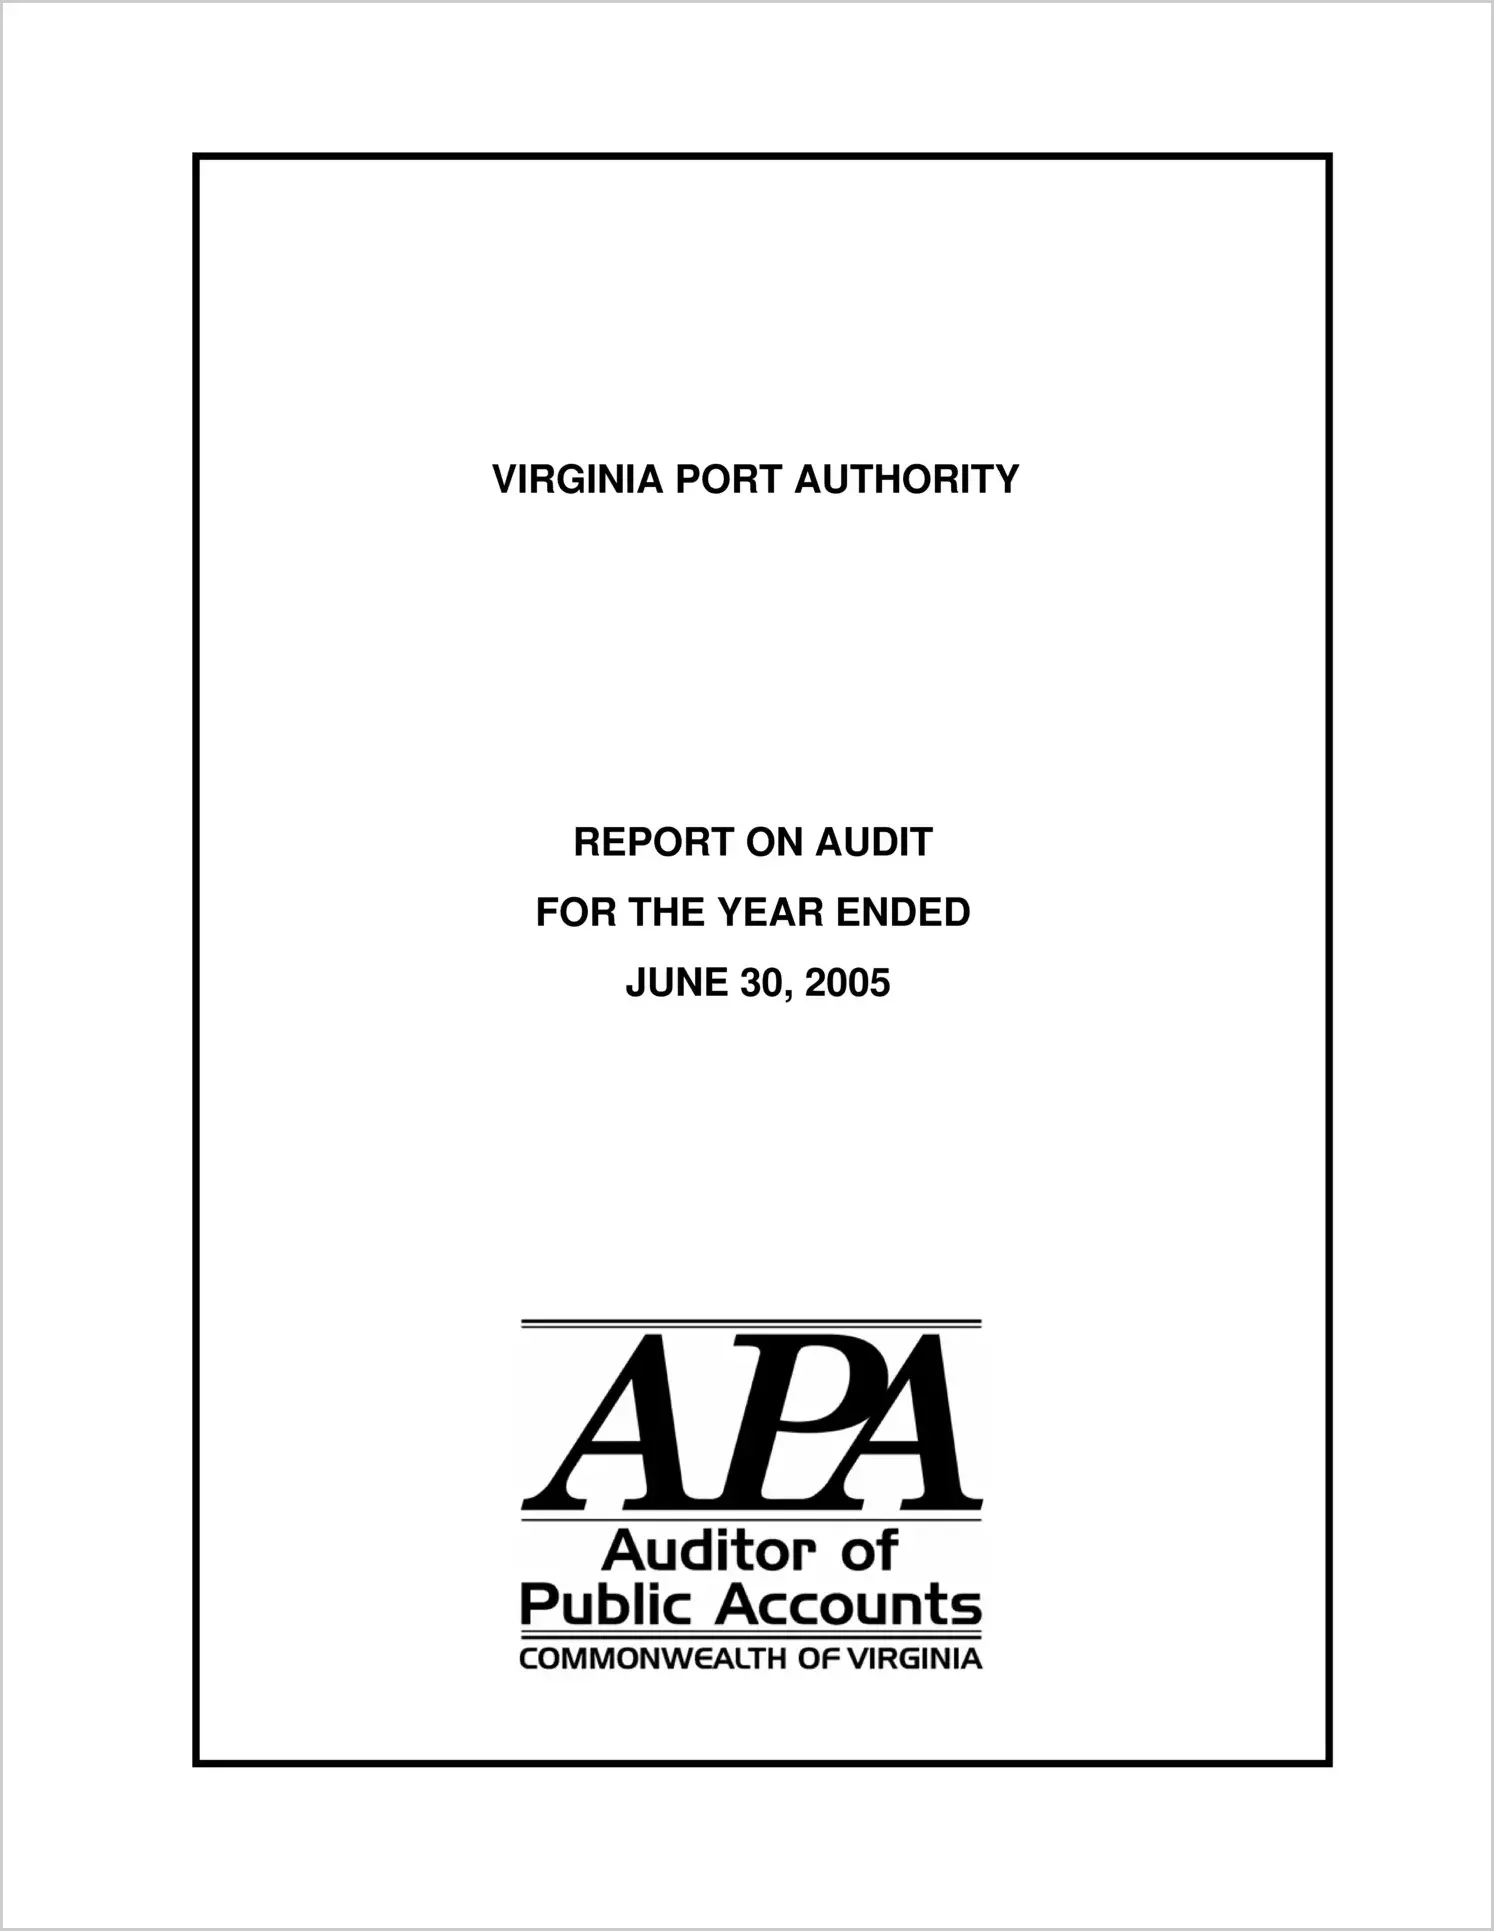 Virginia Port Authority for the year ended June 30, 2005